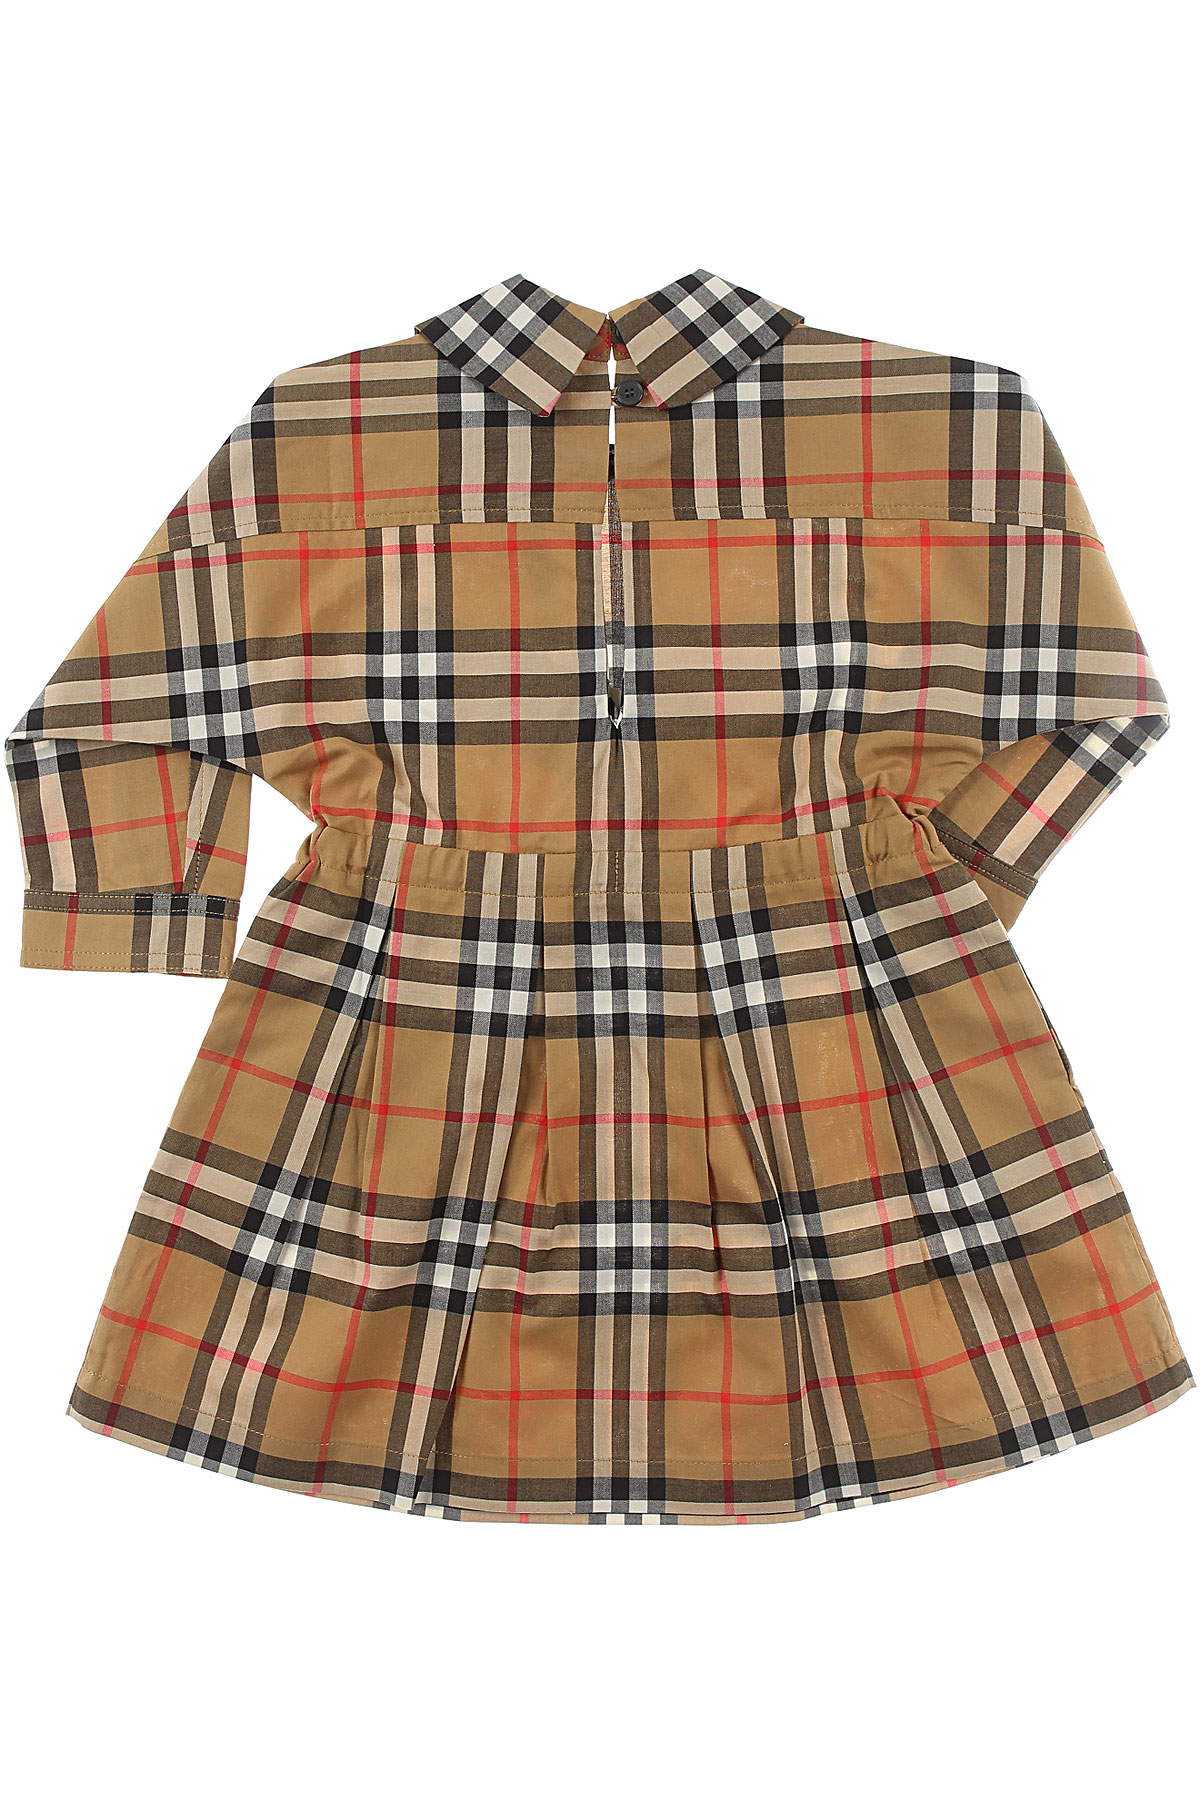 Baby Girl Clothing Burberry, Style code 